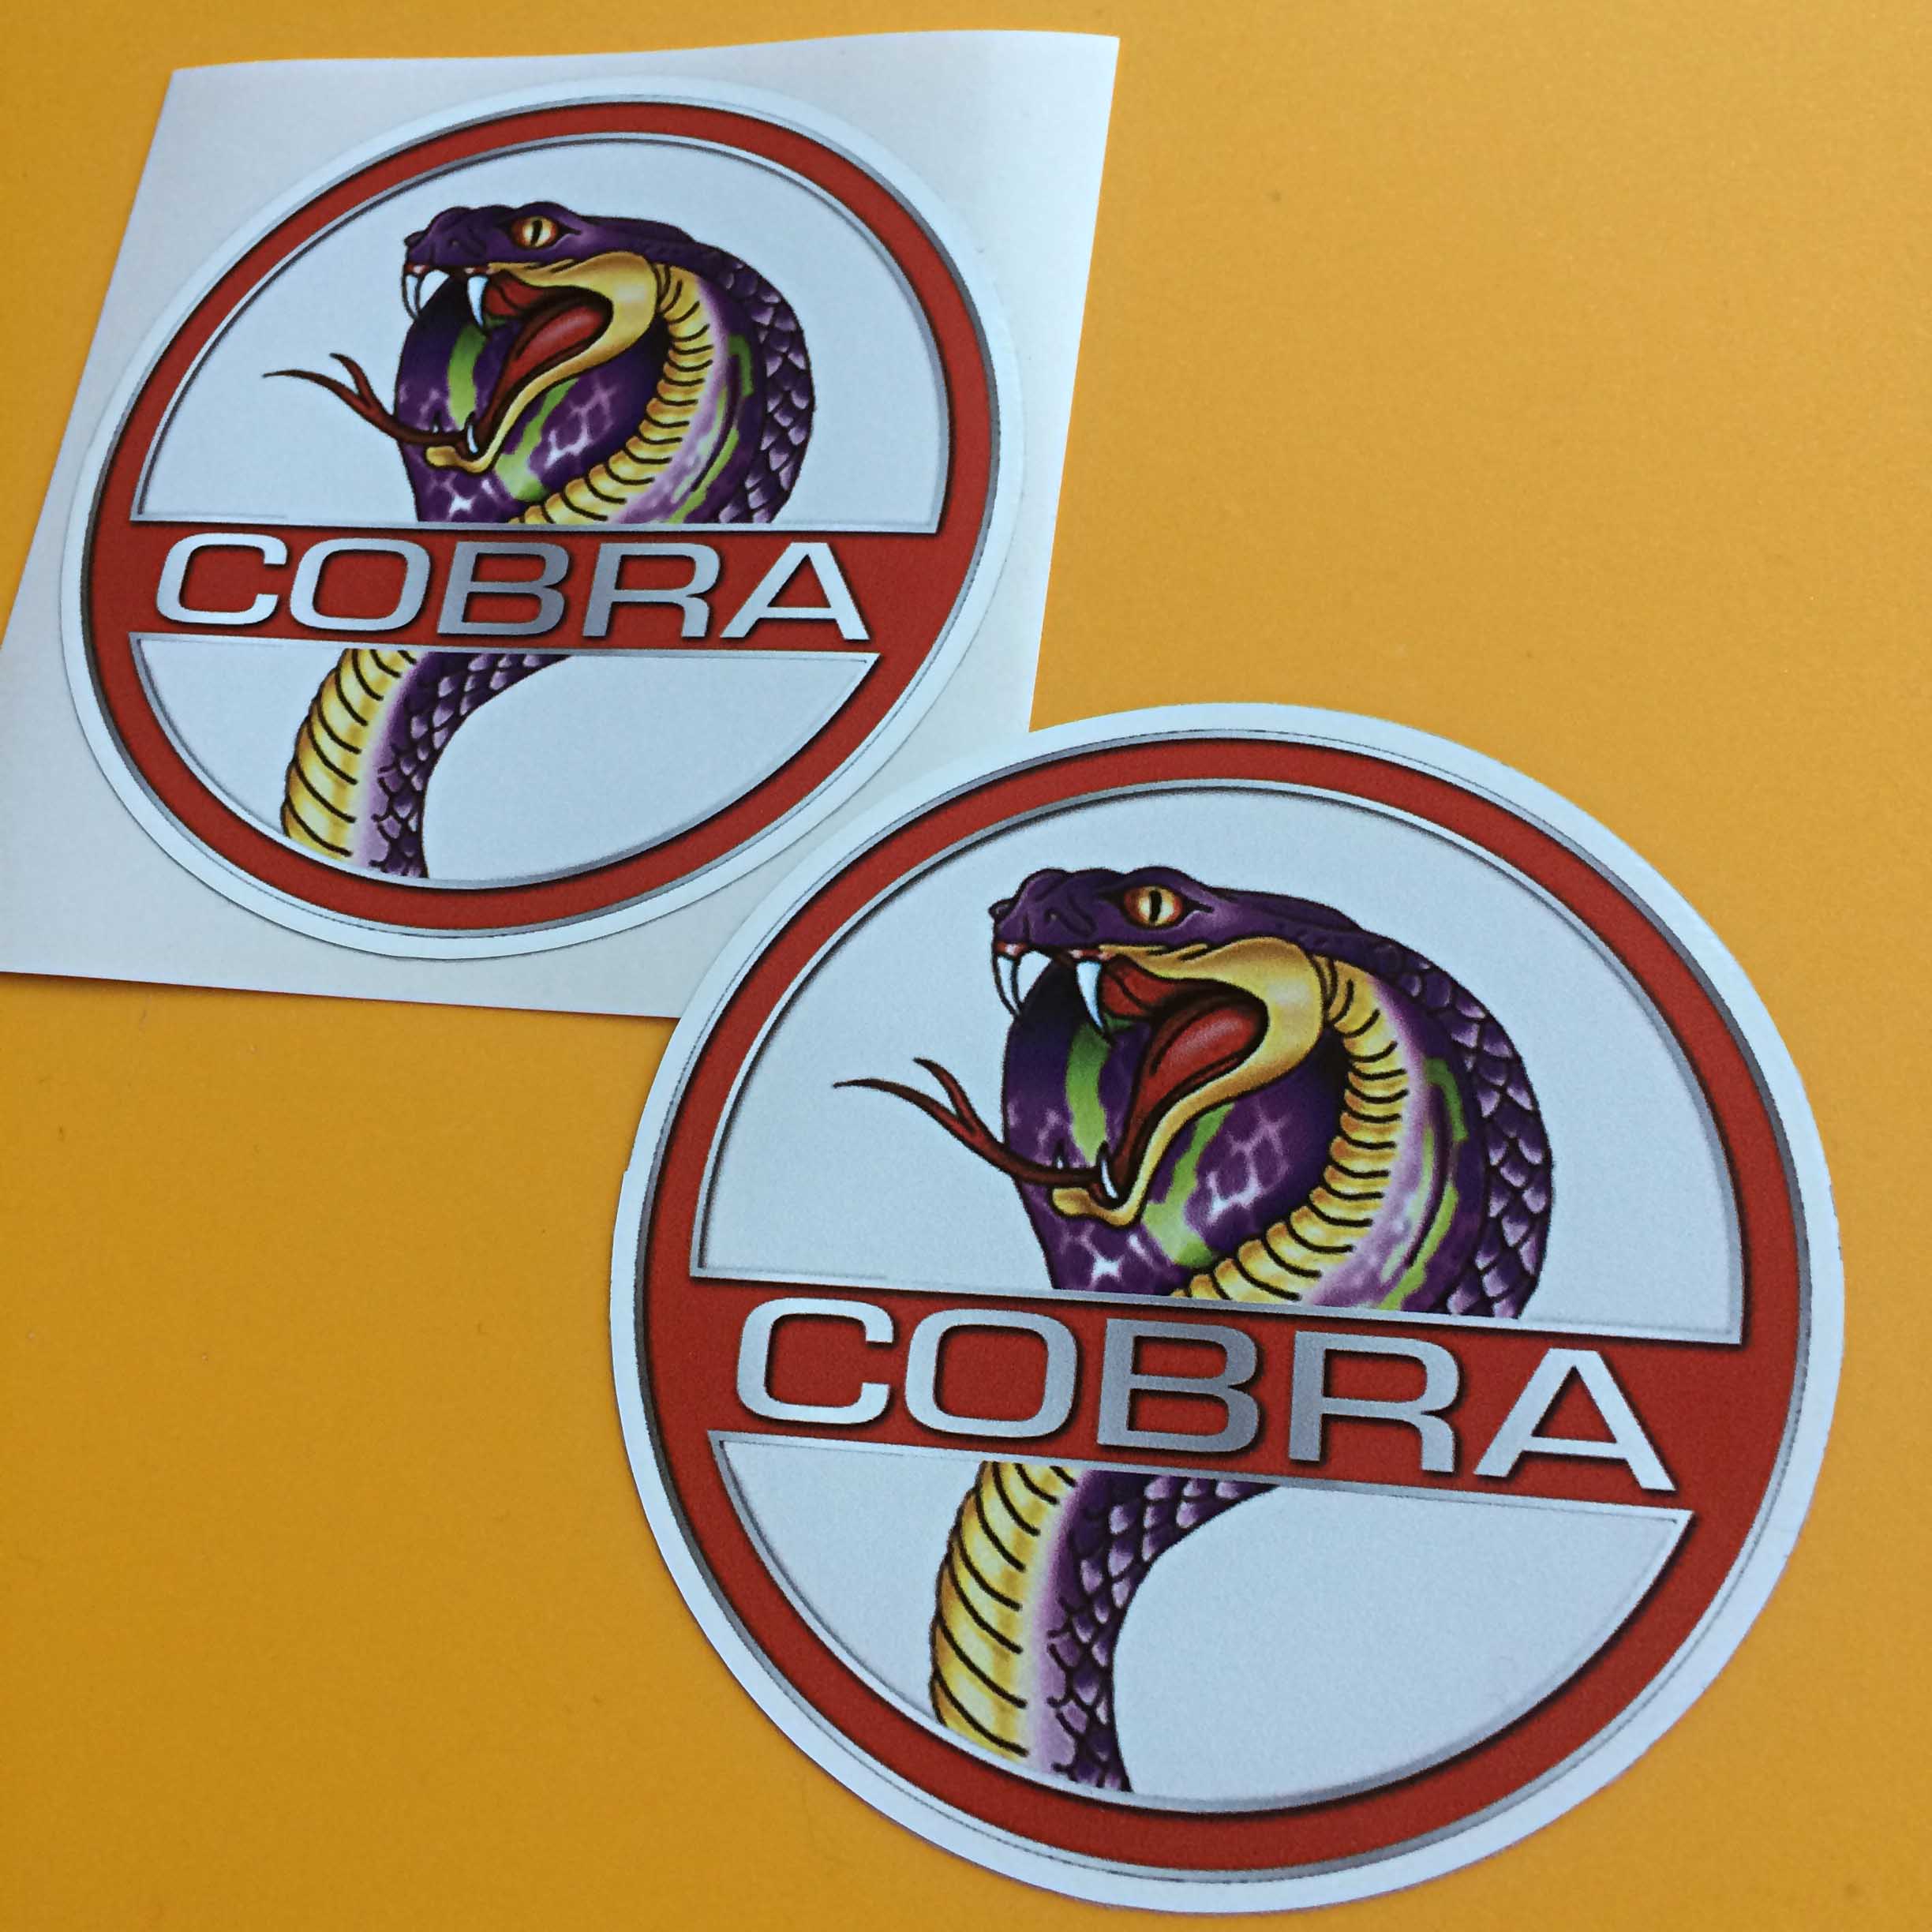 COBRA STICKERS. A white circular sticker with a red border. Across the centre on a red banner is Cobra in white uppercase lettering. In the background is the head of a Cobra in purple, yellow and green displaying a red tongue and white fangs.